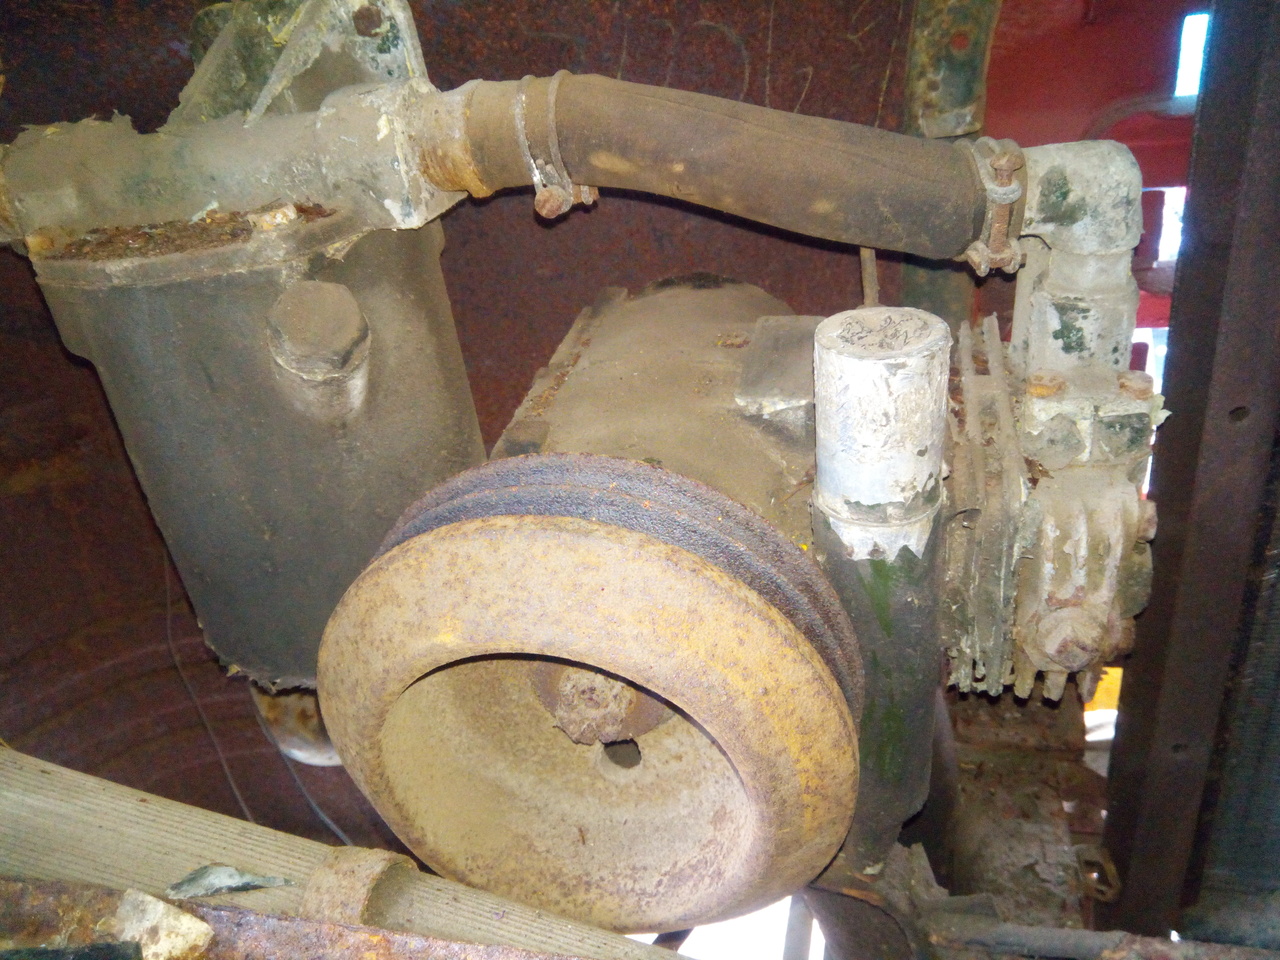 The air compressor and air-brake antifreeze reservoir,
photographed in their natural habitat: the rusty inside of the front
corner of the truck. The air compressor has a large rusty pully, and
an upright aluminium 'tower' that has rough grip marks on it like
someone has been trying to unscrew it.